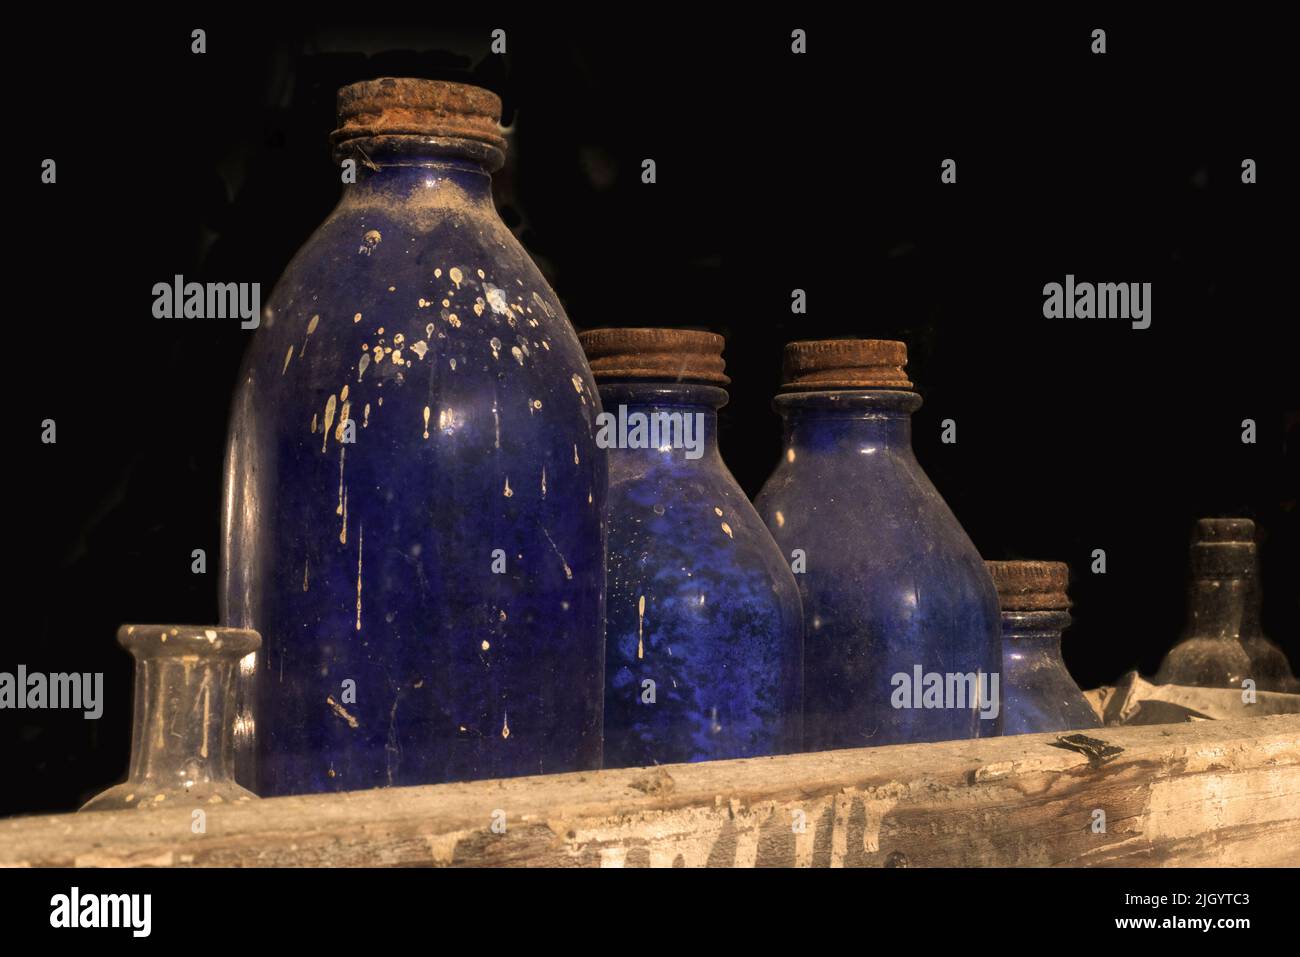 A collection of antique bottles sits with other items in the window of an abandoned store. Stock Photo